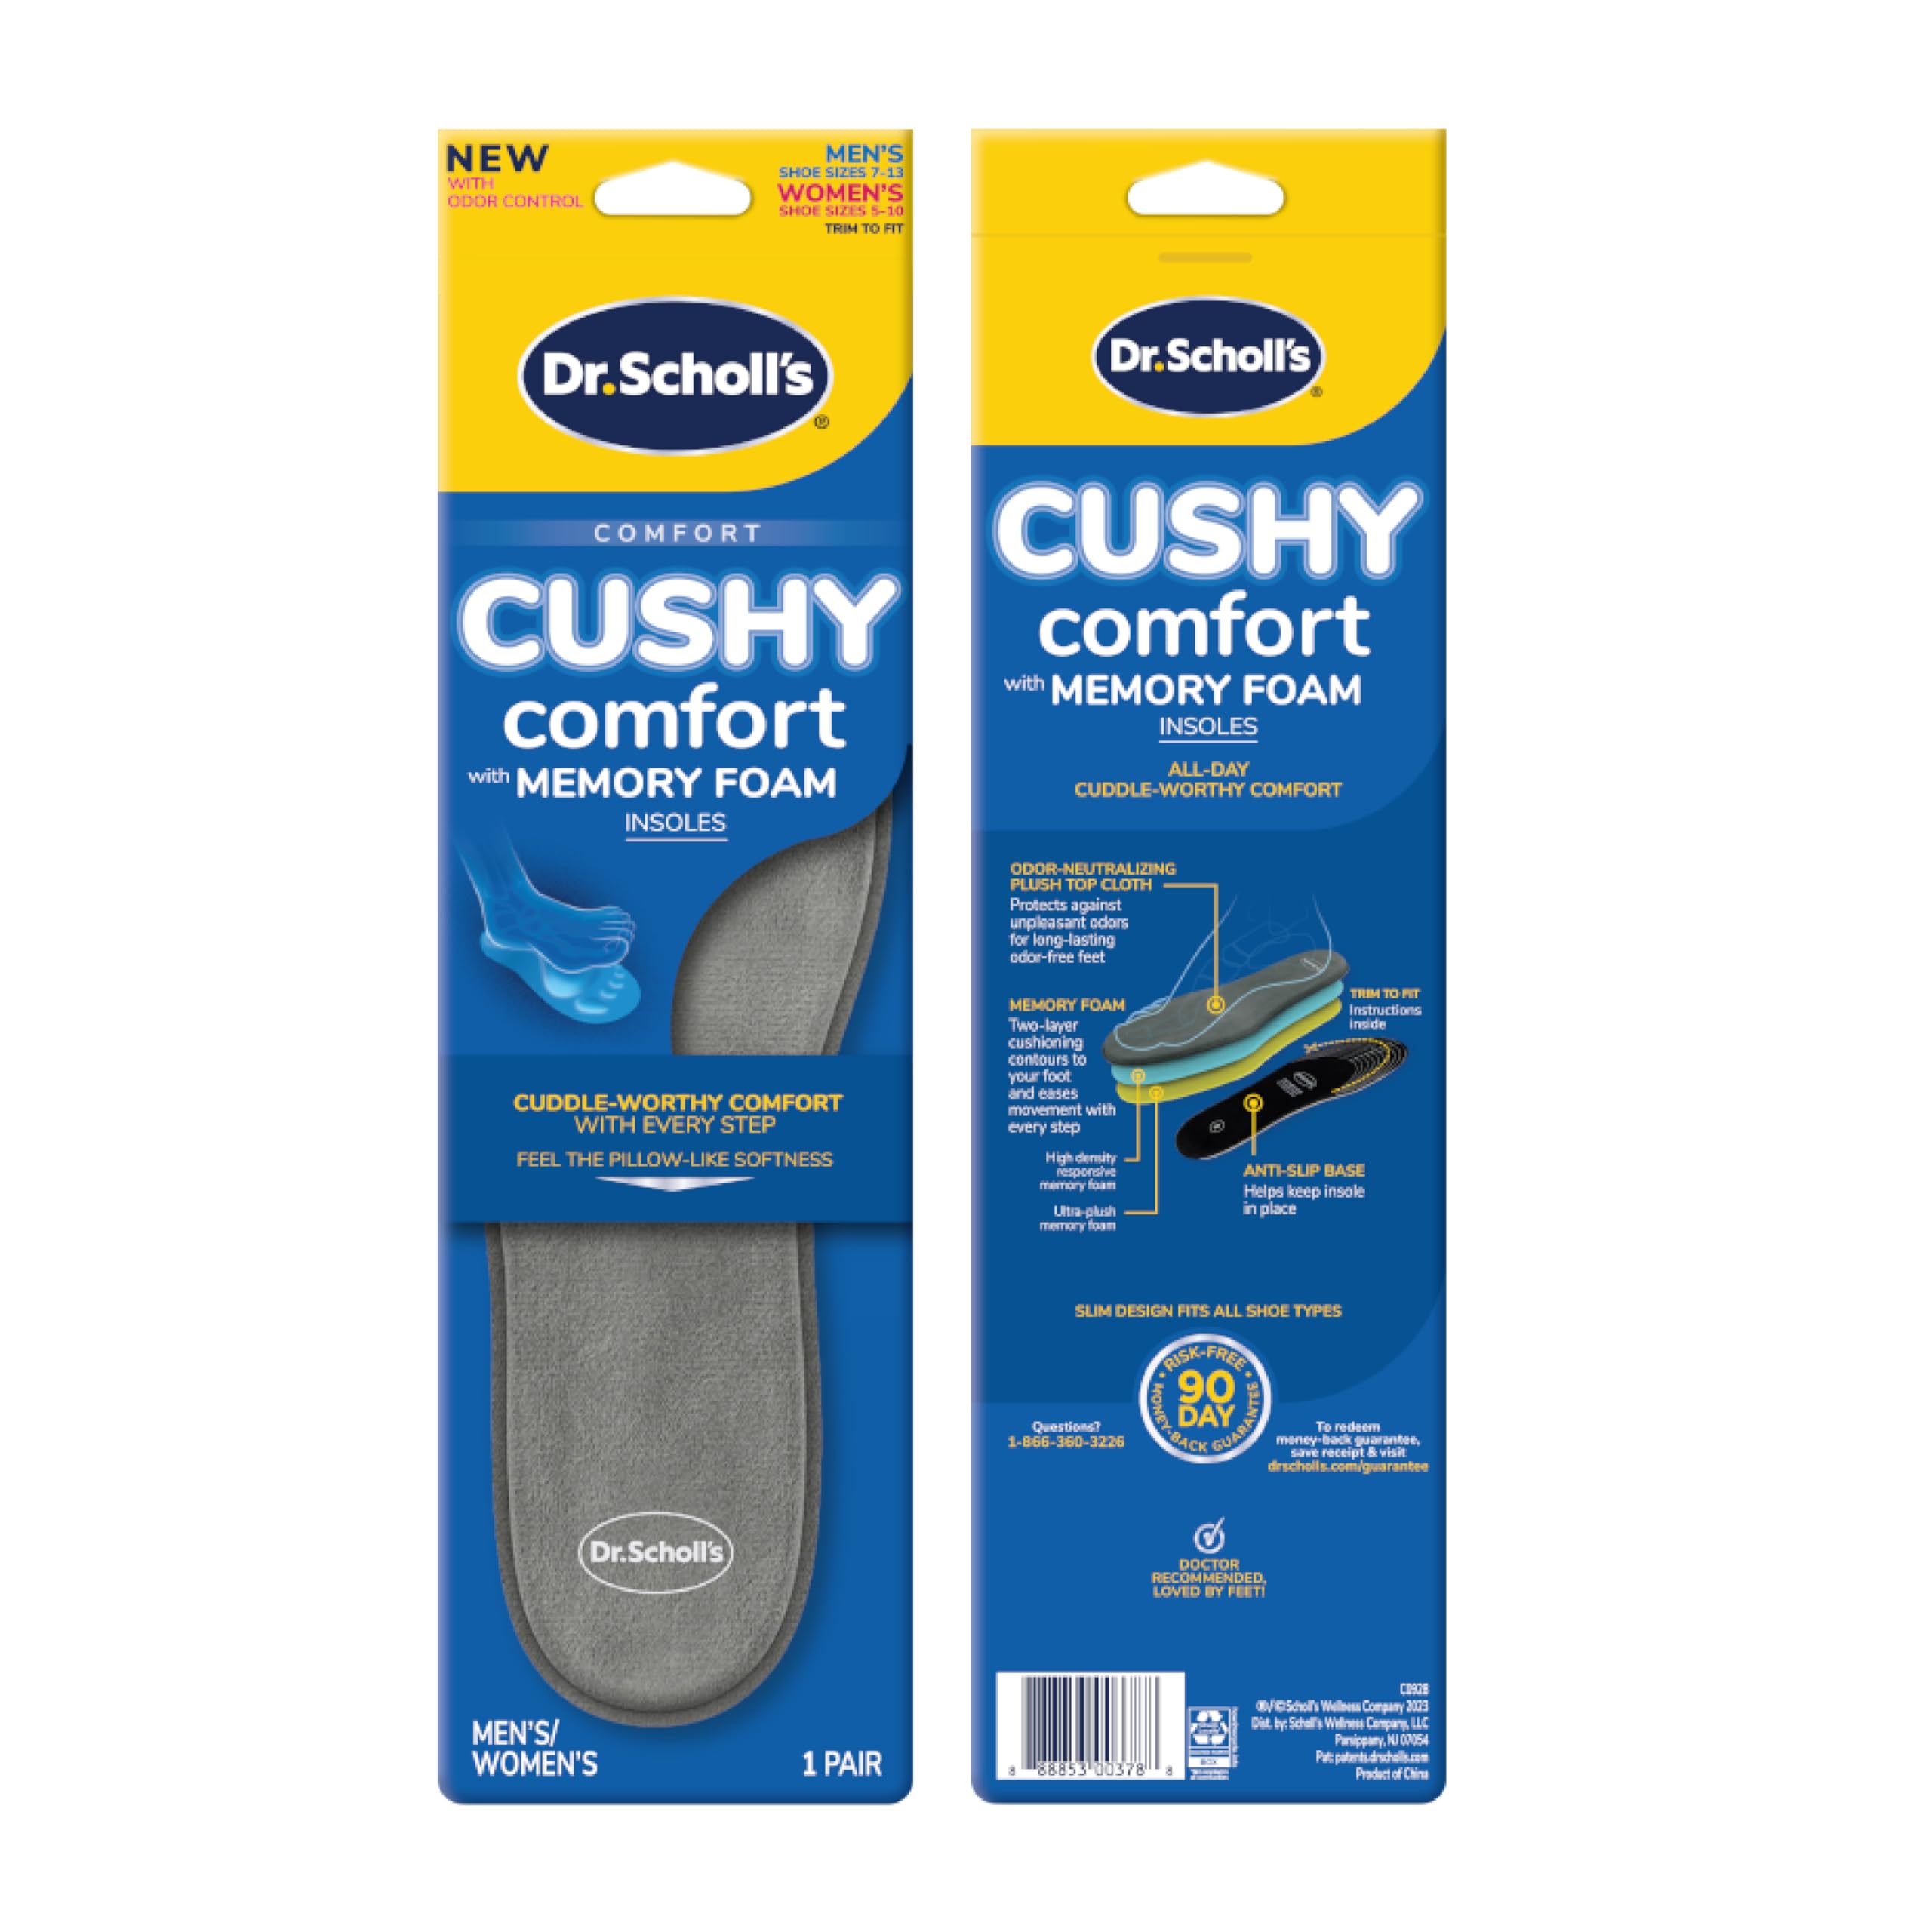 Dr. Scholl's® Cushy Comfort with Memory Foam Insoles, Full-Foot Responsive Cushioning, Relieves Pressure, Slim Design, Trim Inserts to Fit Shoes, Unisex, Men's Shoe Size 7-13 Women's 5-10, 1 Pair